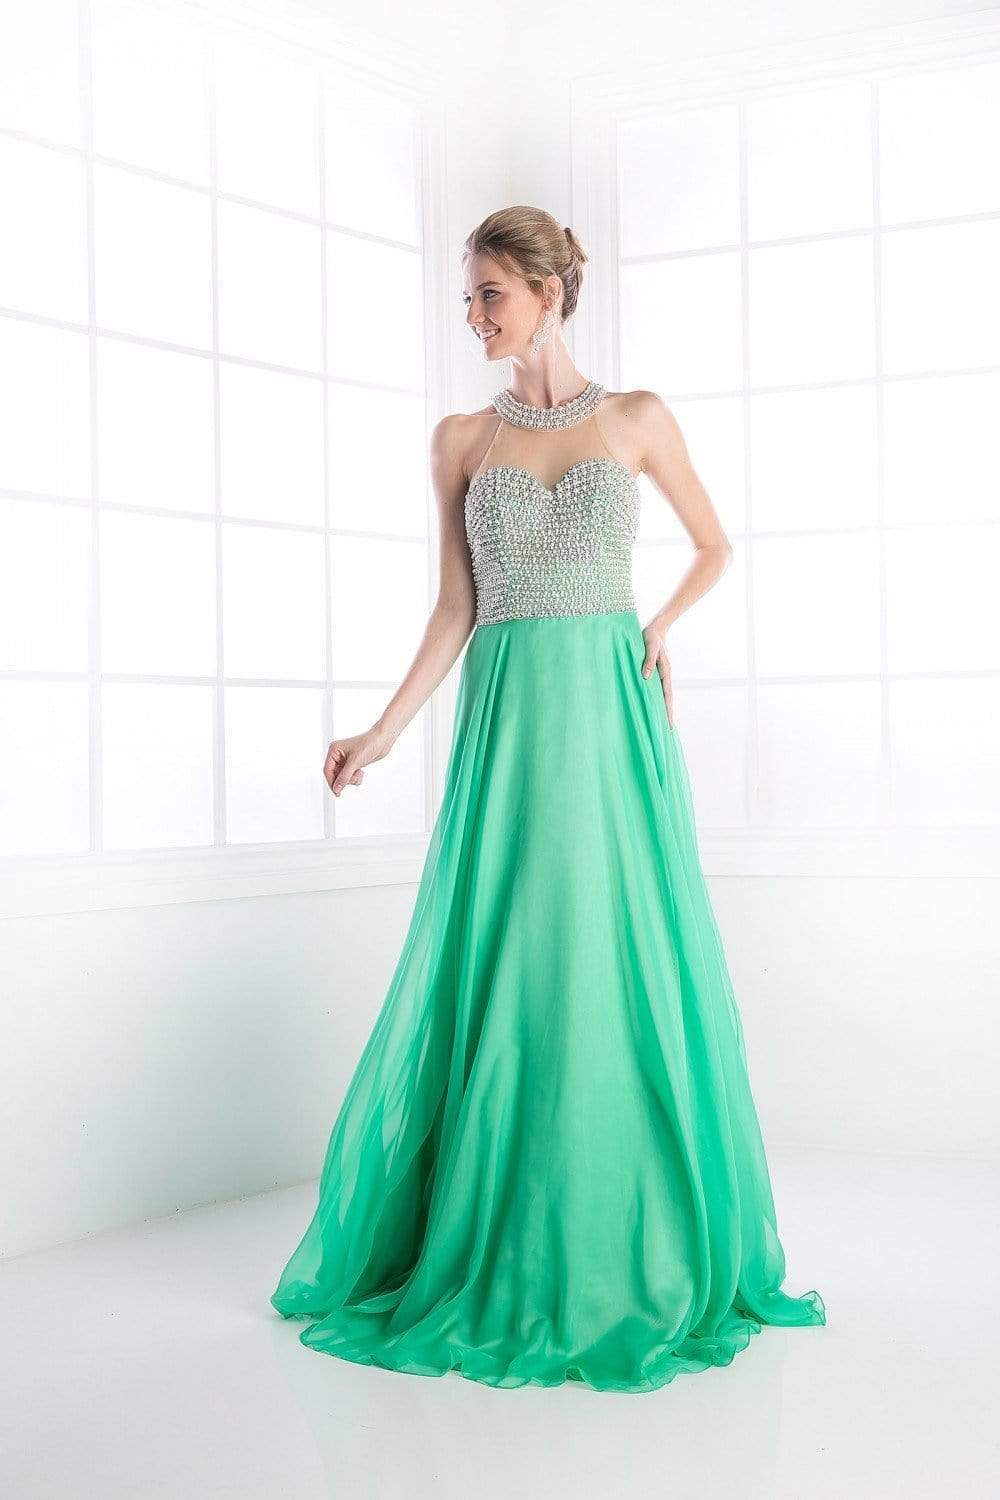 Cinderella Divine - High Halter Pearl Adorned Bodice Chiffon Gown Special Occasion Dress 2 / Green